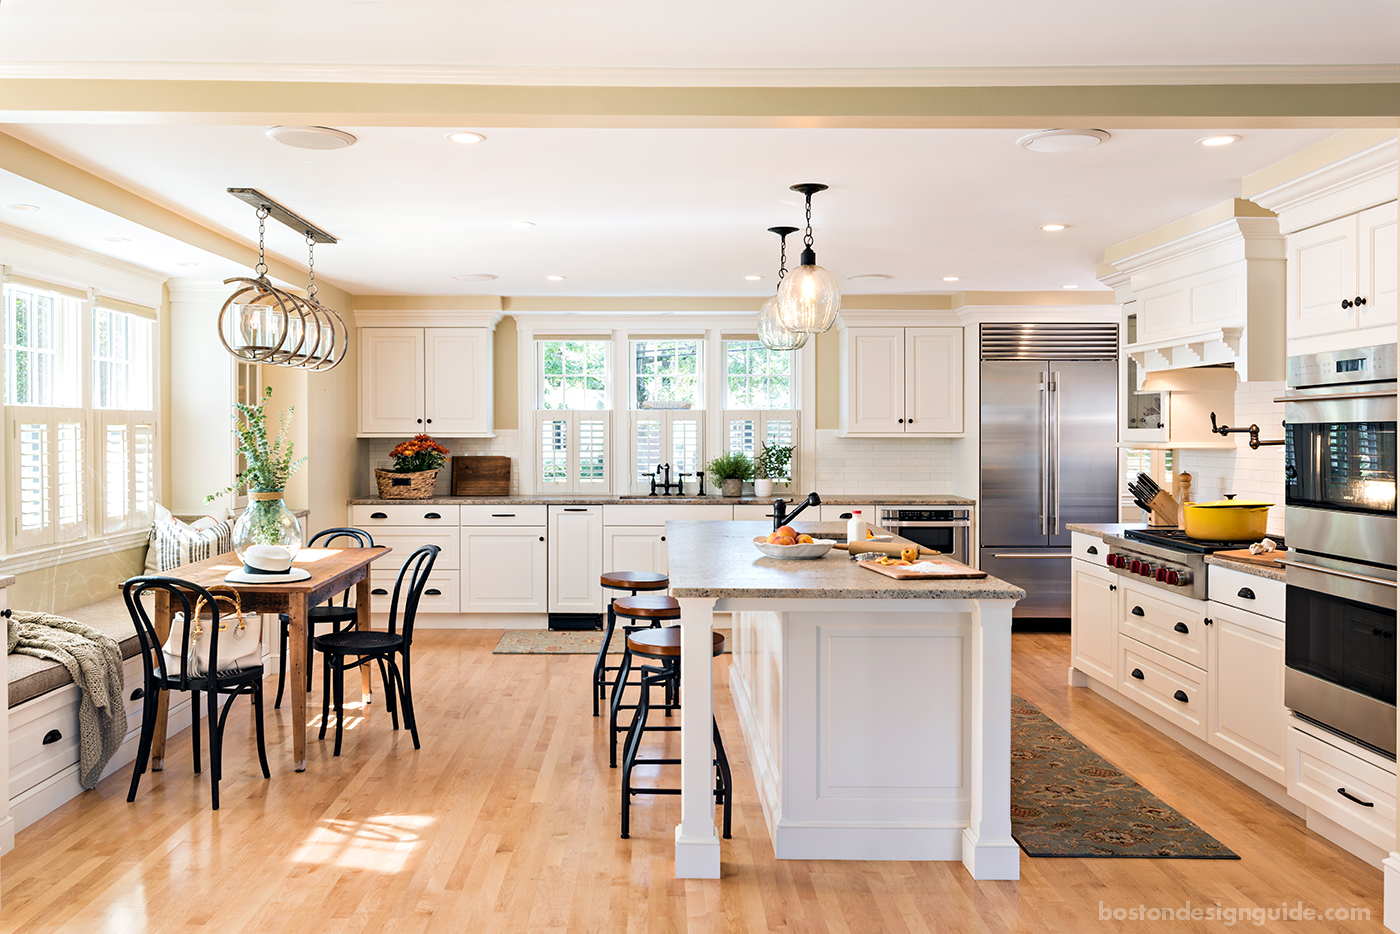 A Historic Hingham Home Gets a Kitchen Makeover | Boston Design Guide